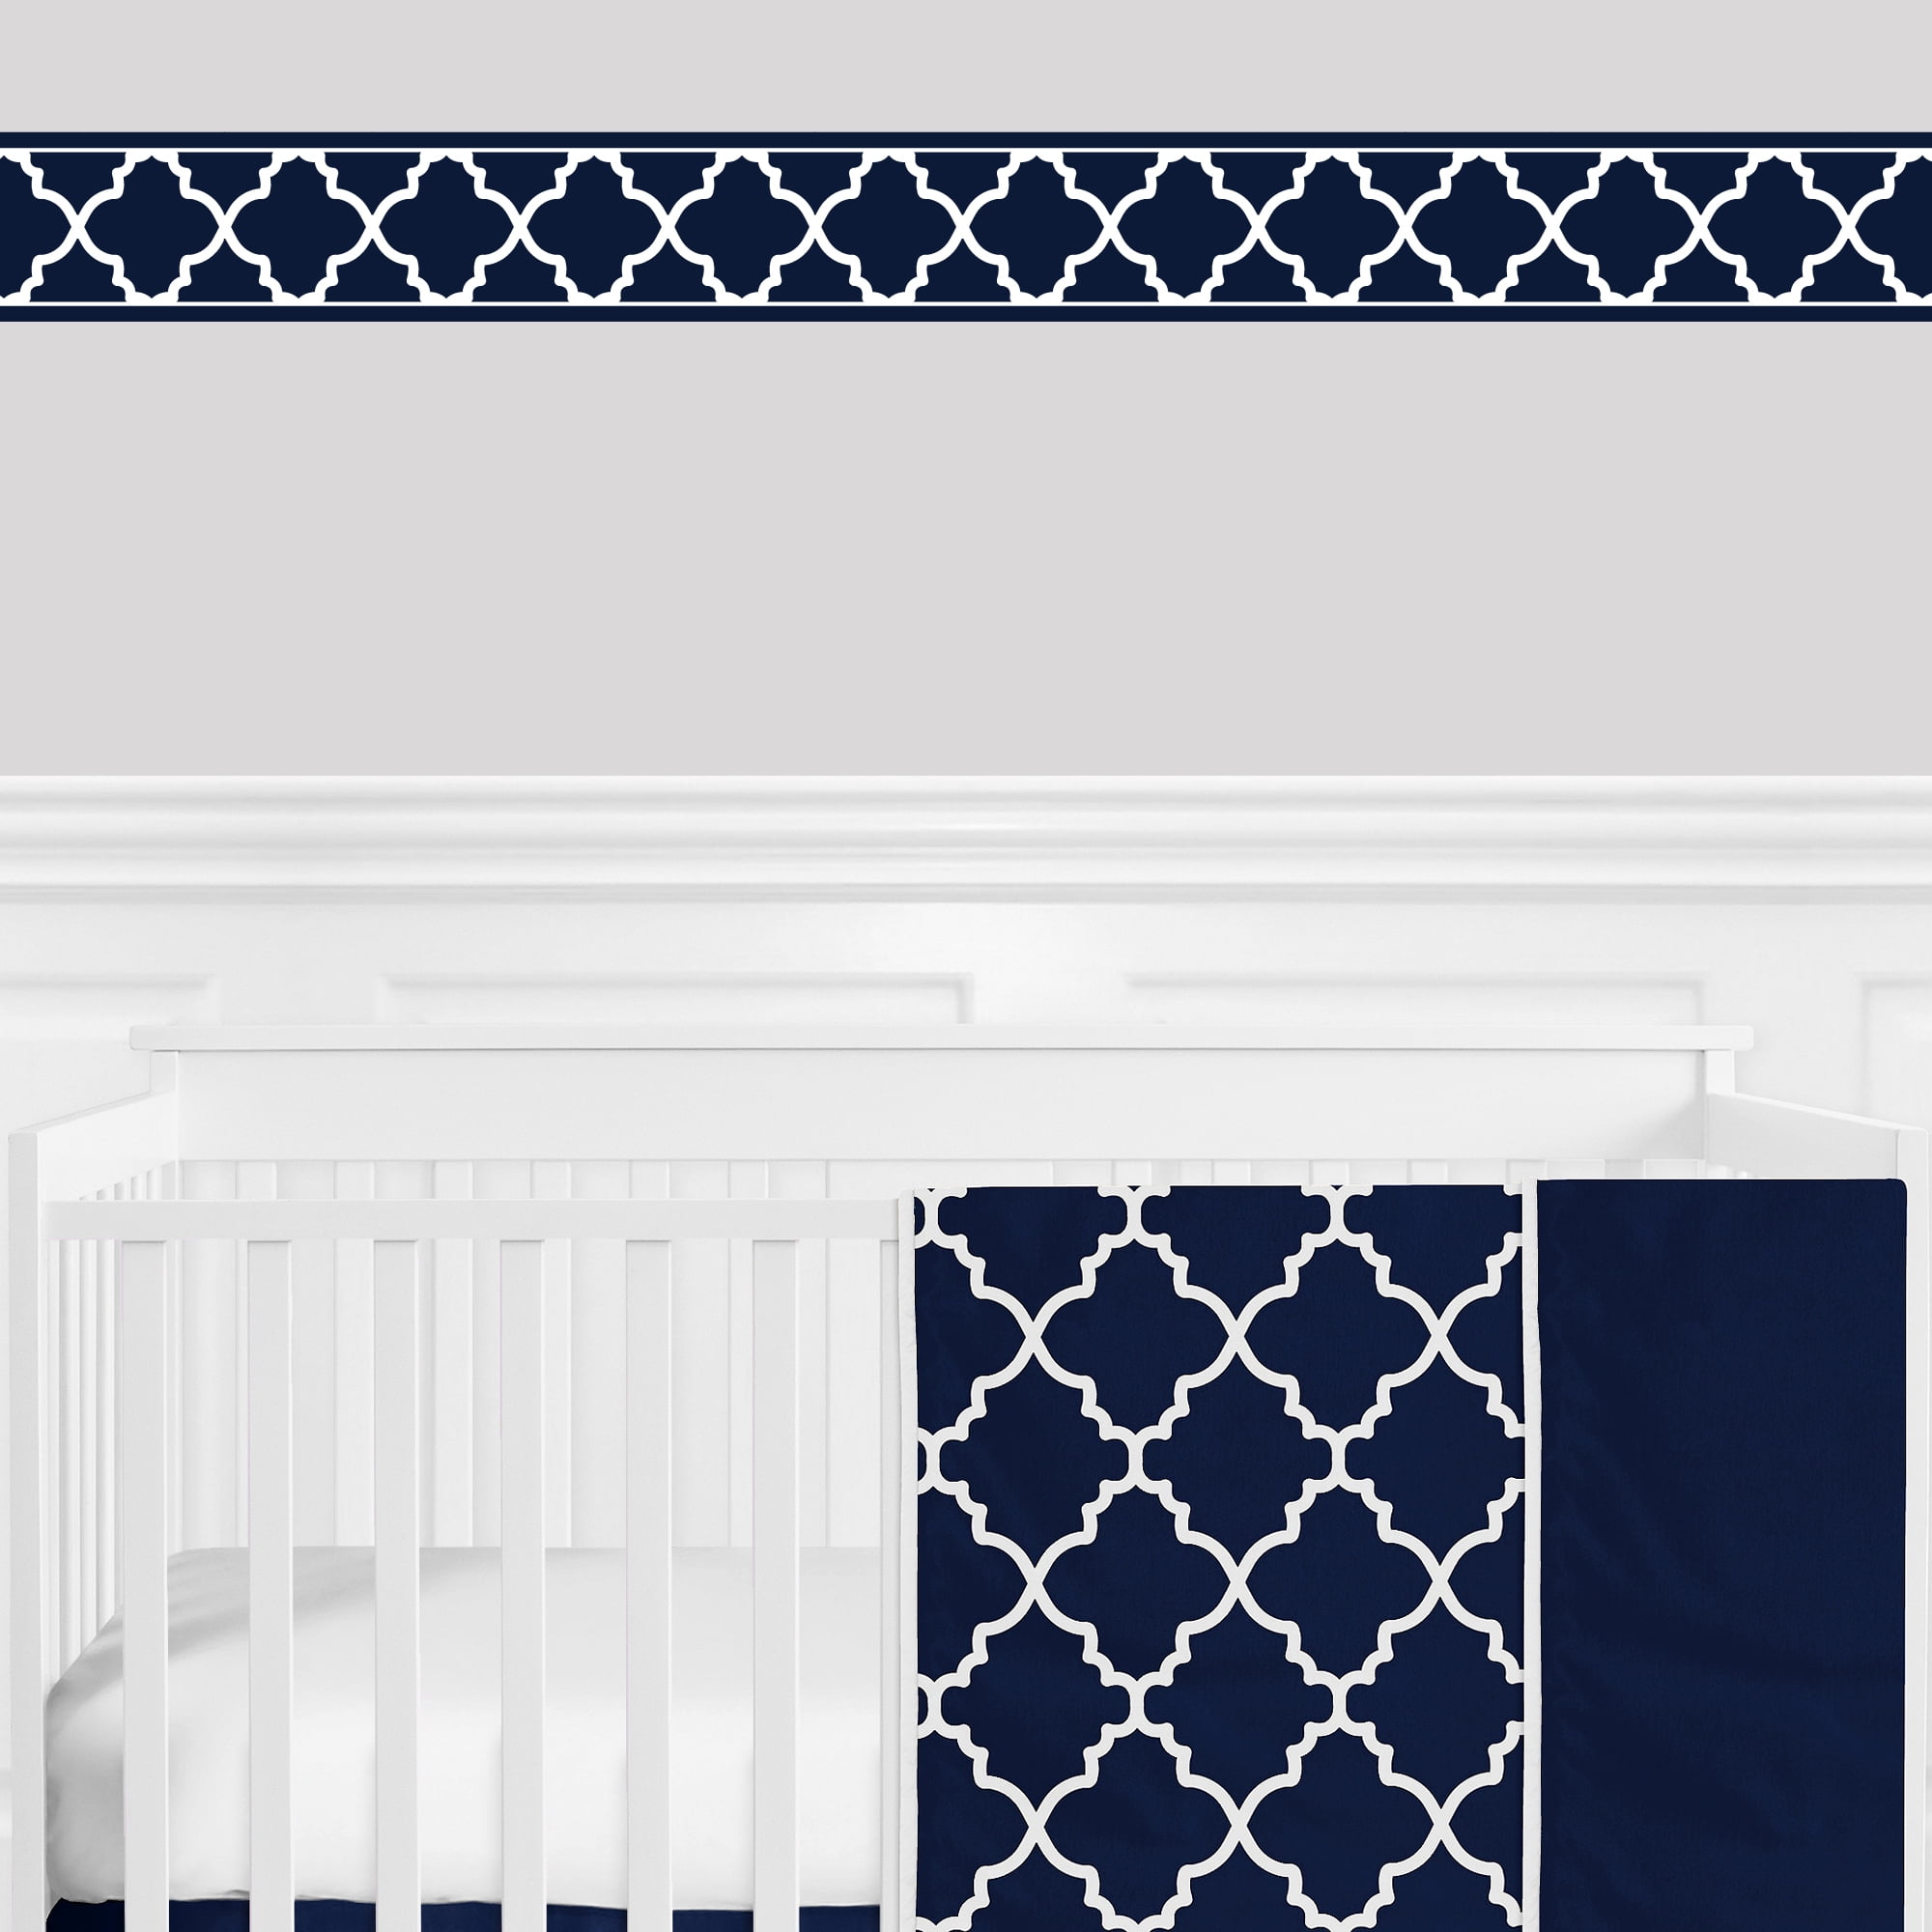 Roarsome! Wallpaper in Navy and White